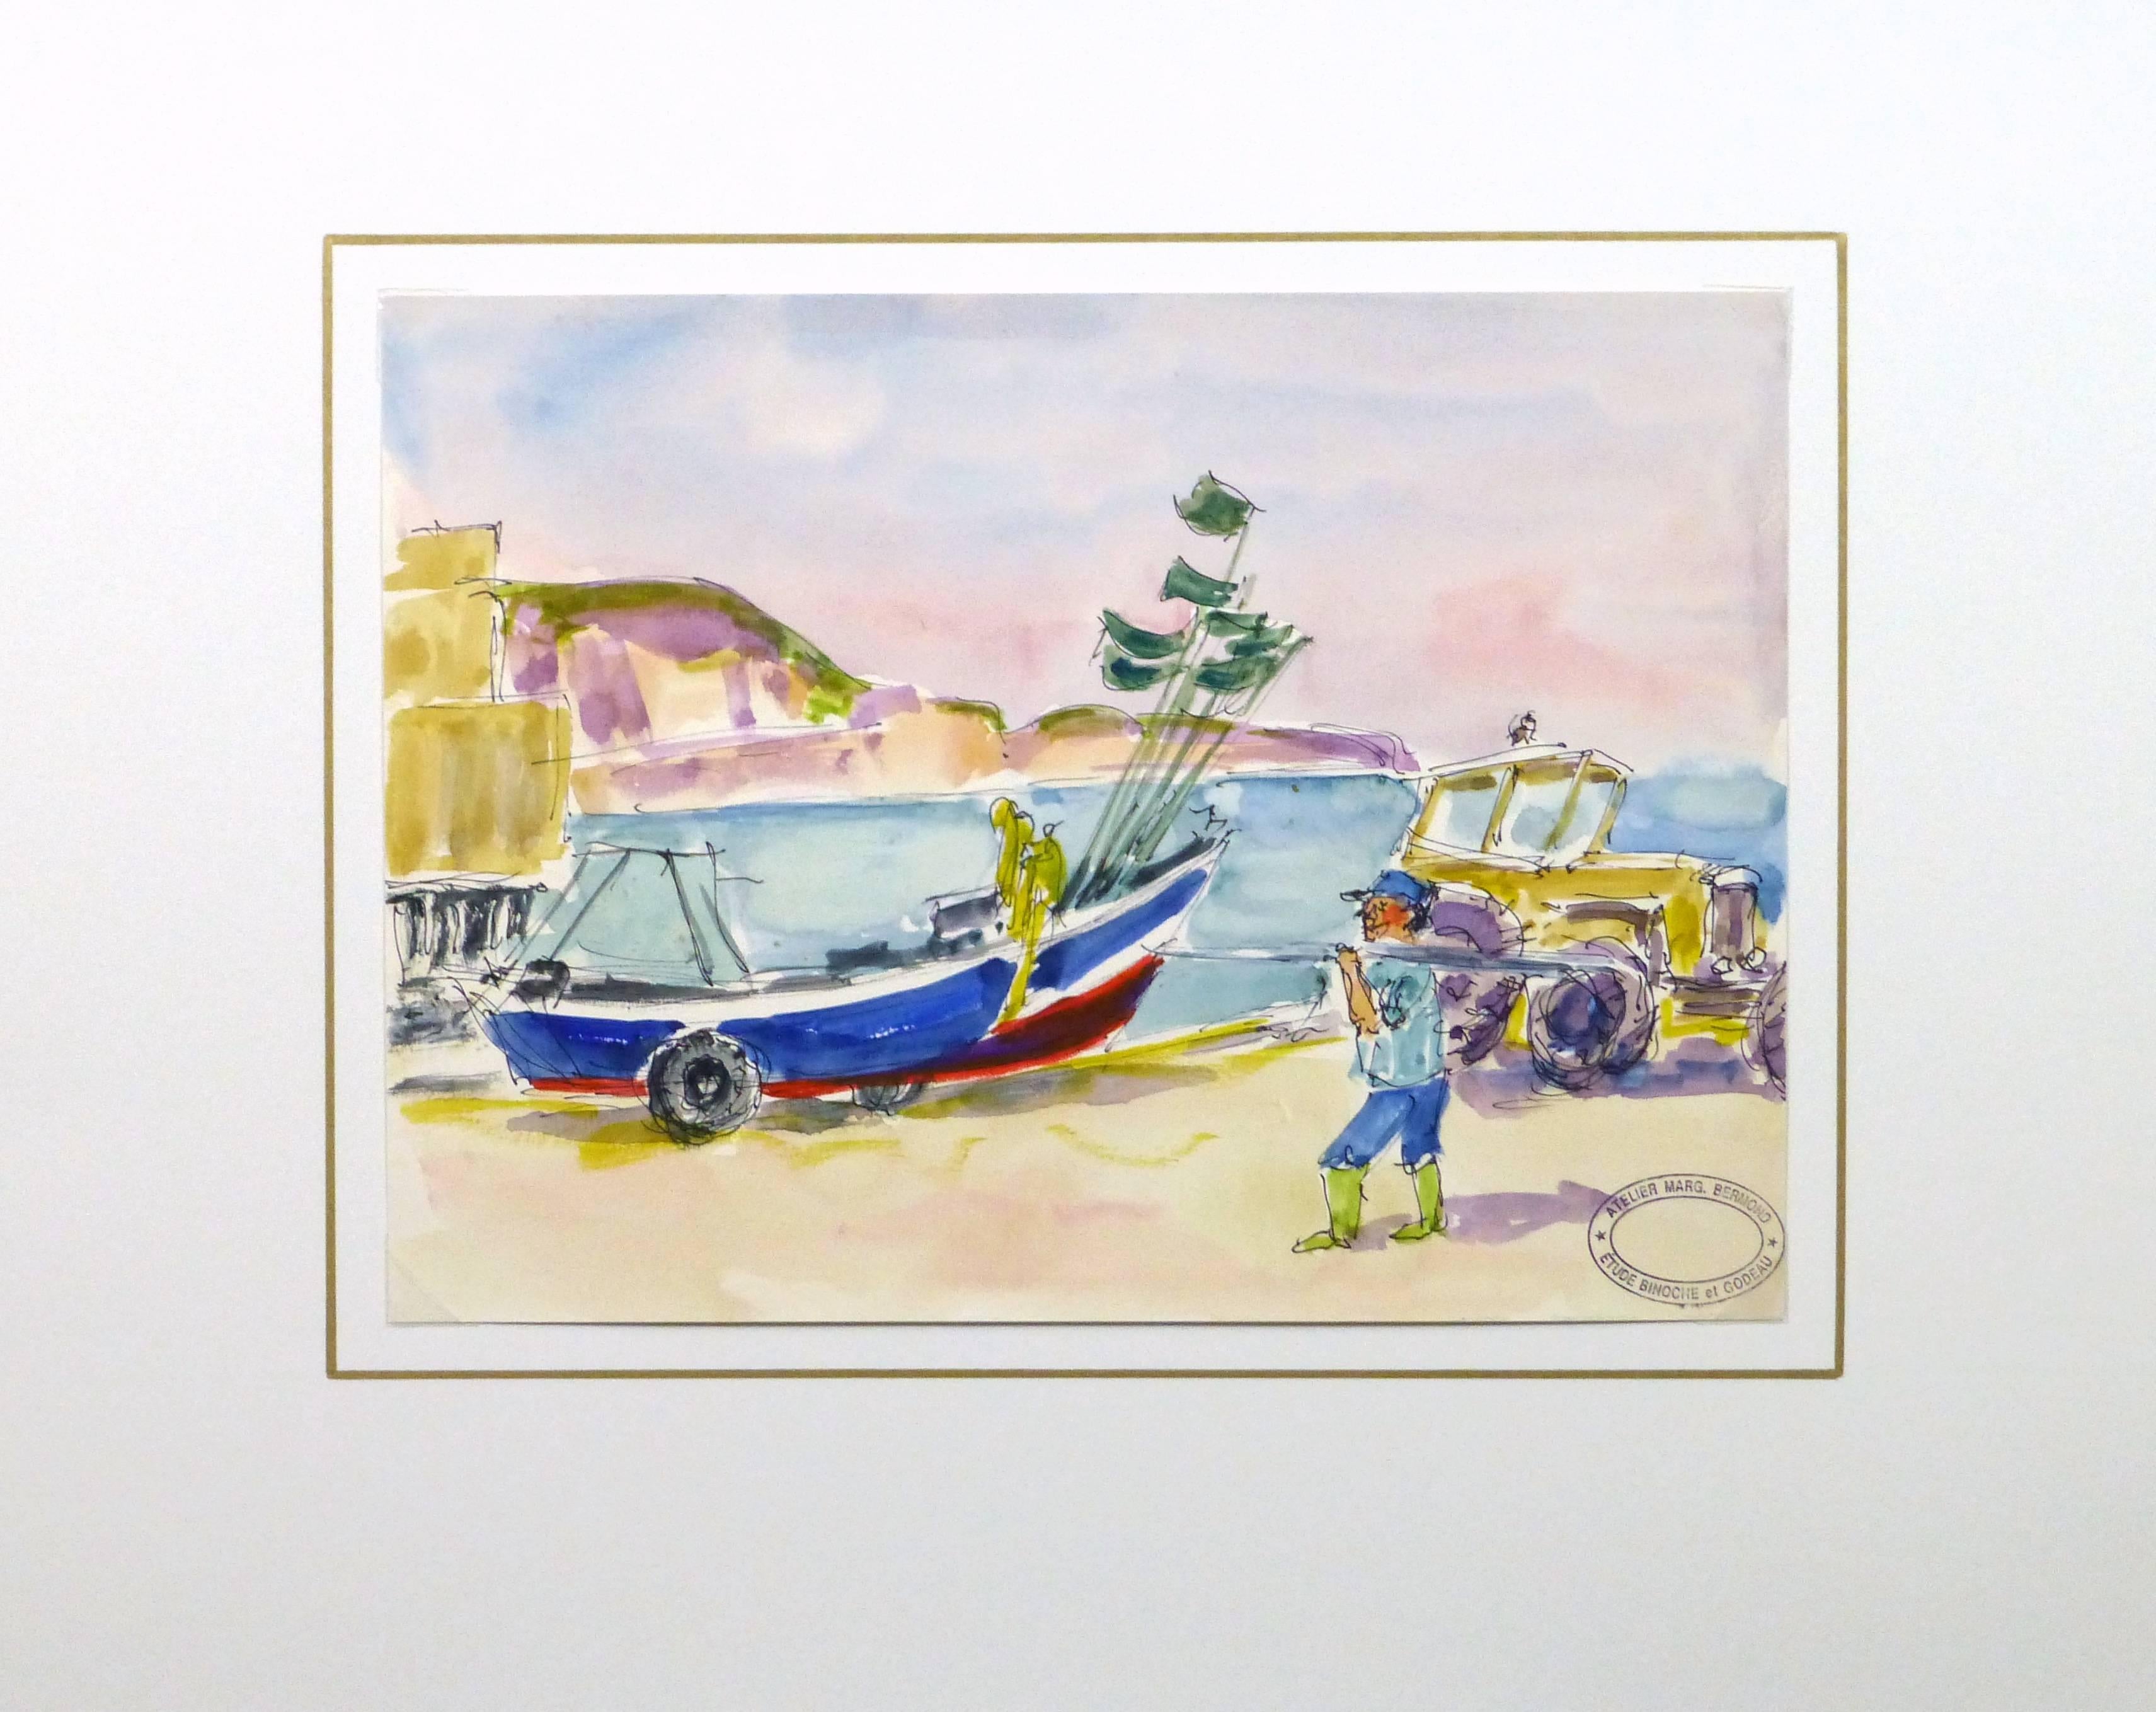 Dynamic watercolor and ink painting of a fisherman loading up his gear at the end of a productive day by artist Marguerite Bermond, circa 1970. Artist's studio stamp lower right.

Original one-of-a-kind artwork on paper displayed on a white mat